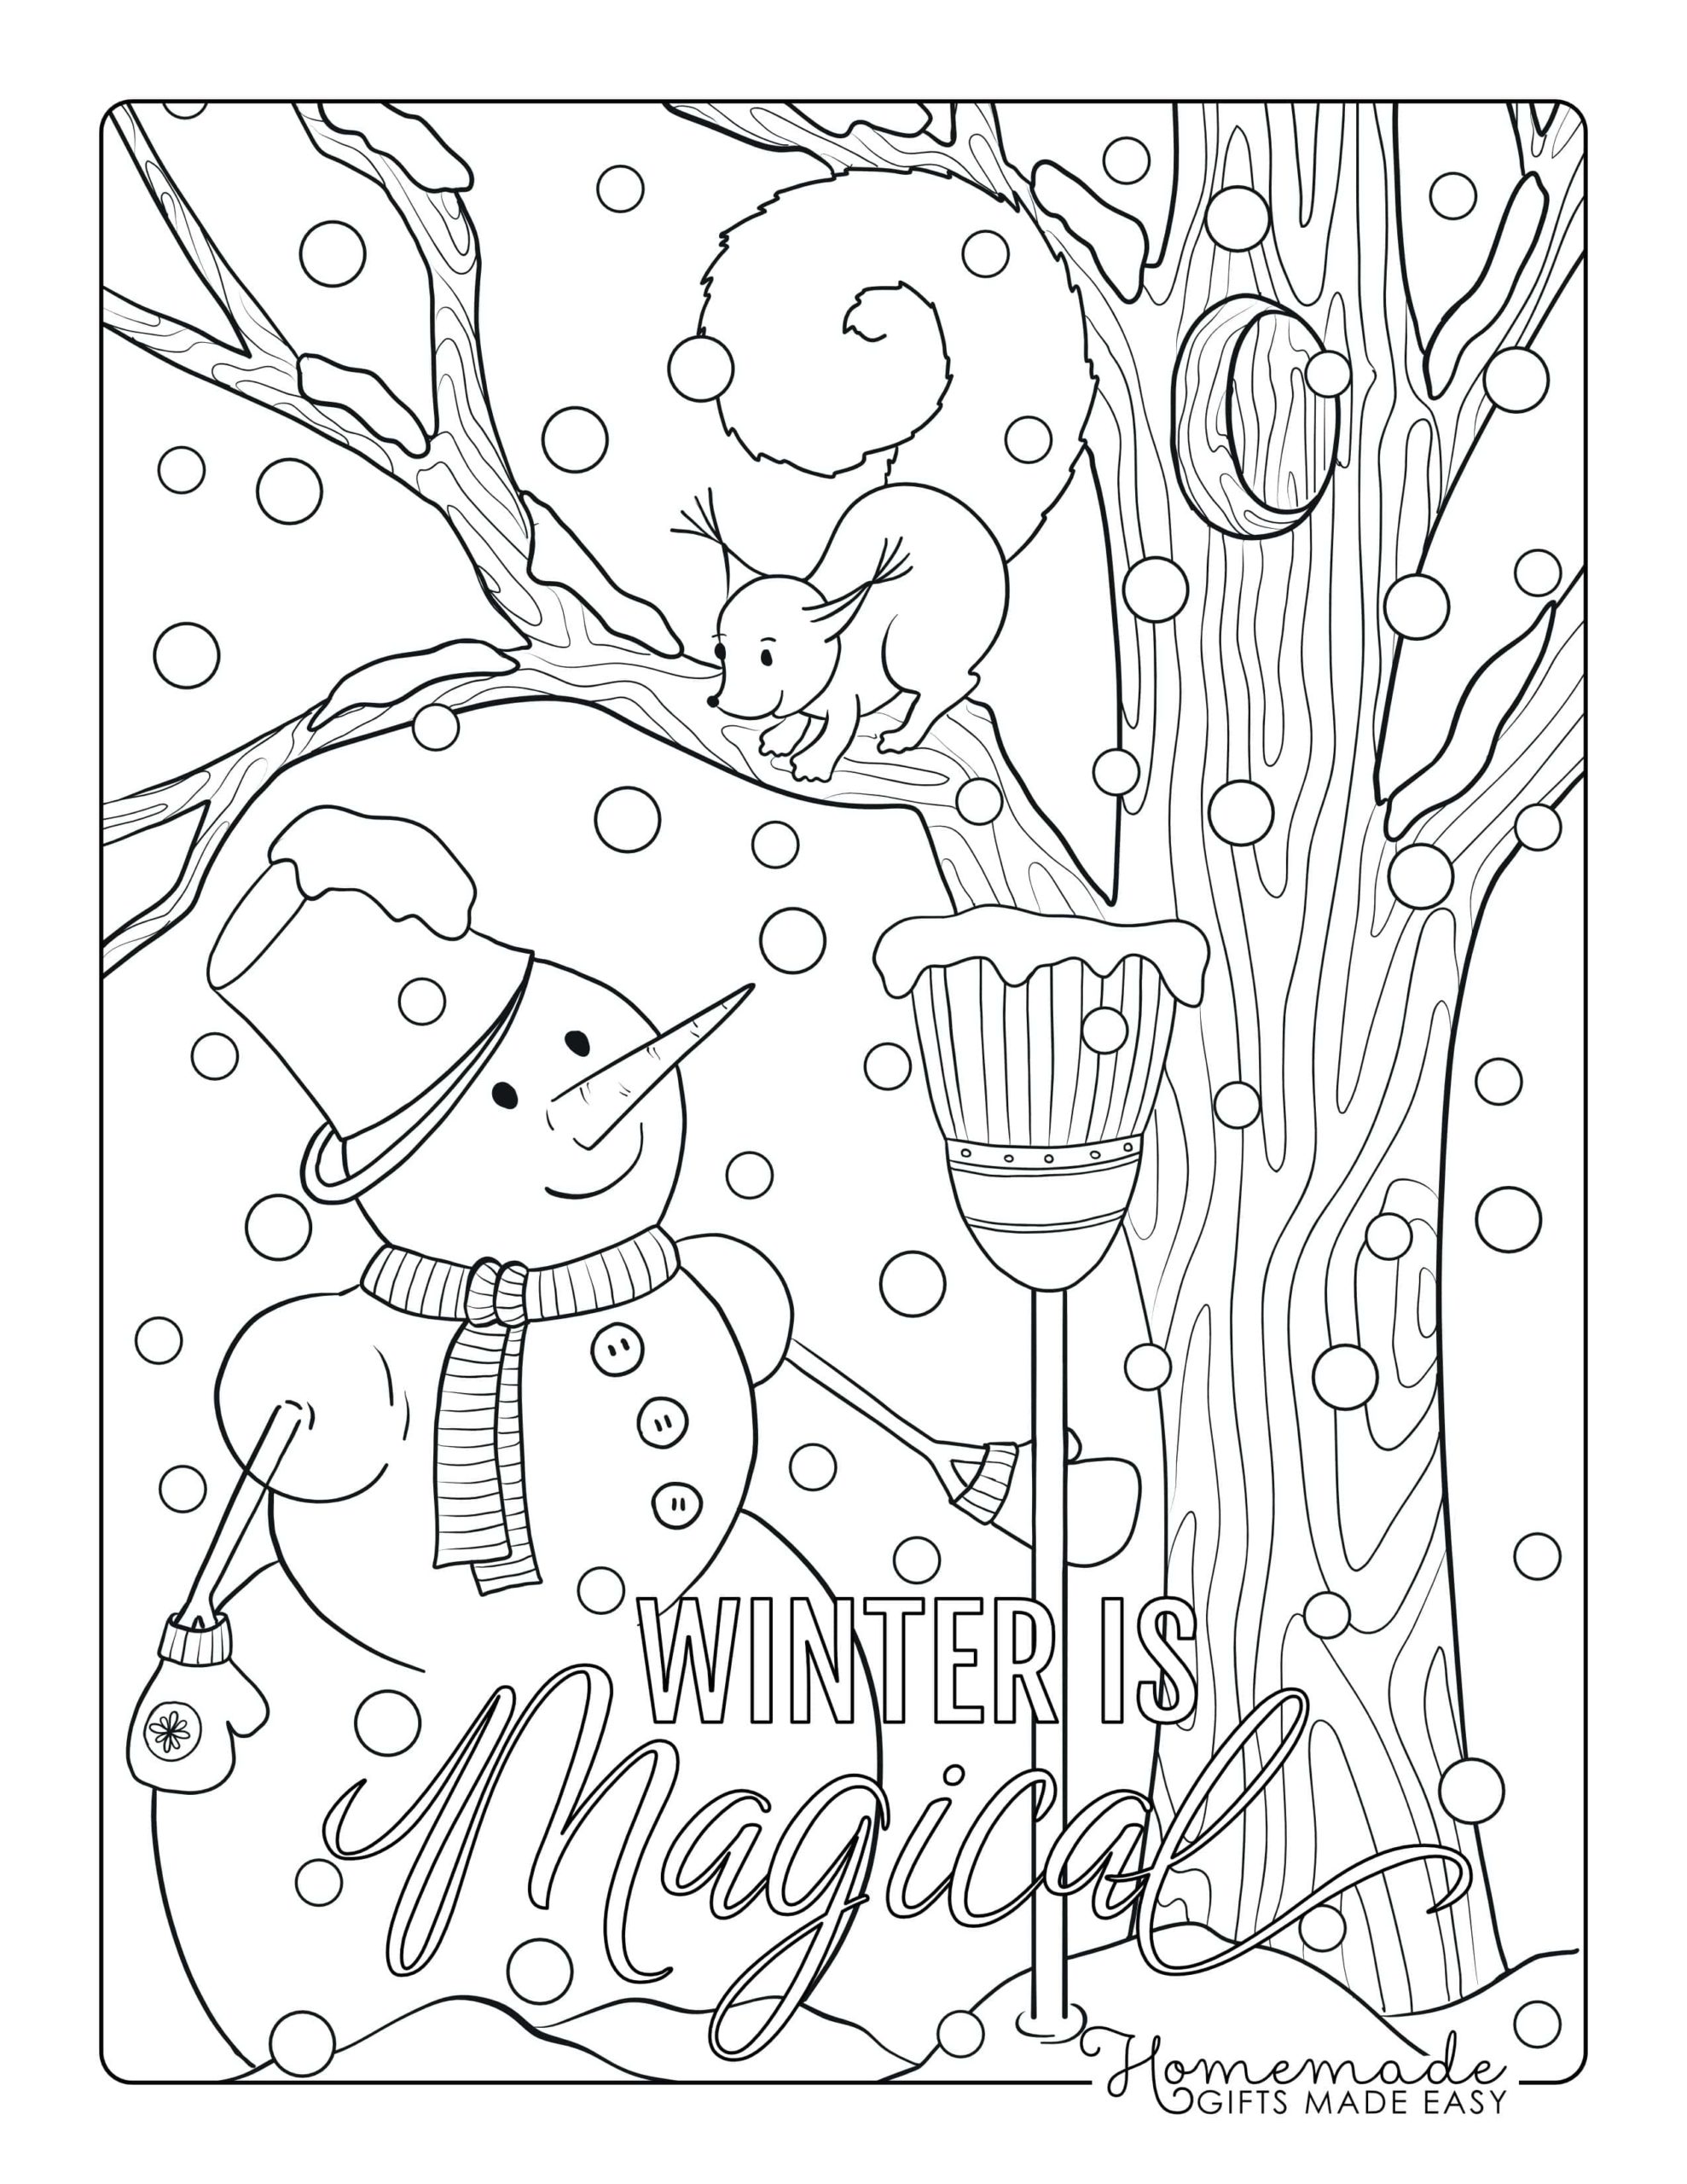 Winter Wonderland Coloring Pages - Home Design Ideas